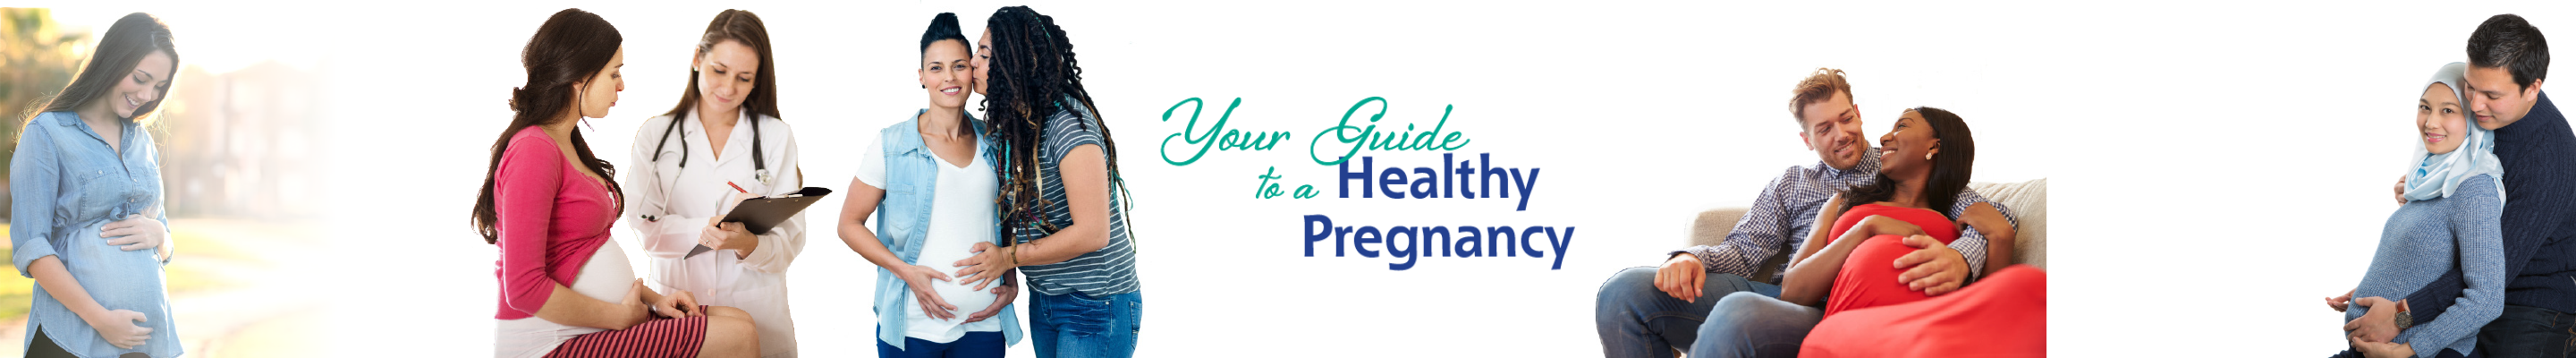 Healthy Pregnancy Guide Banner Image